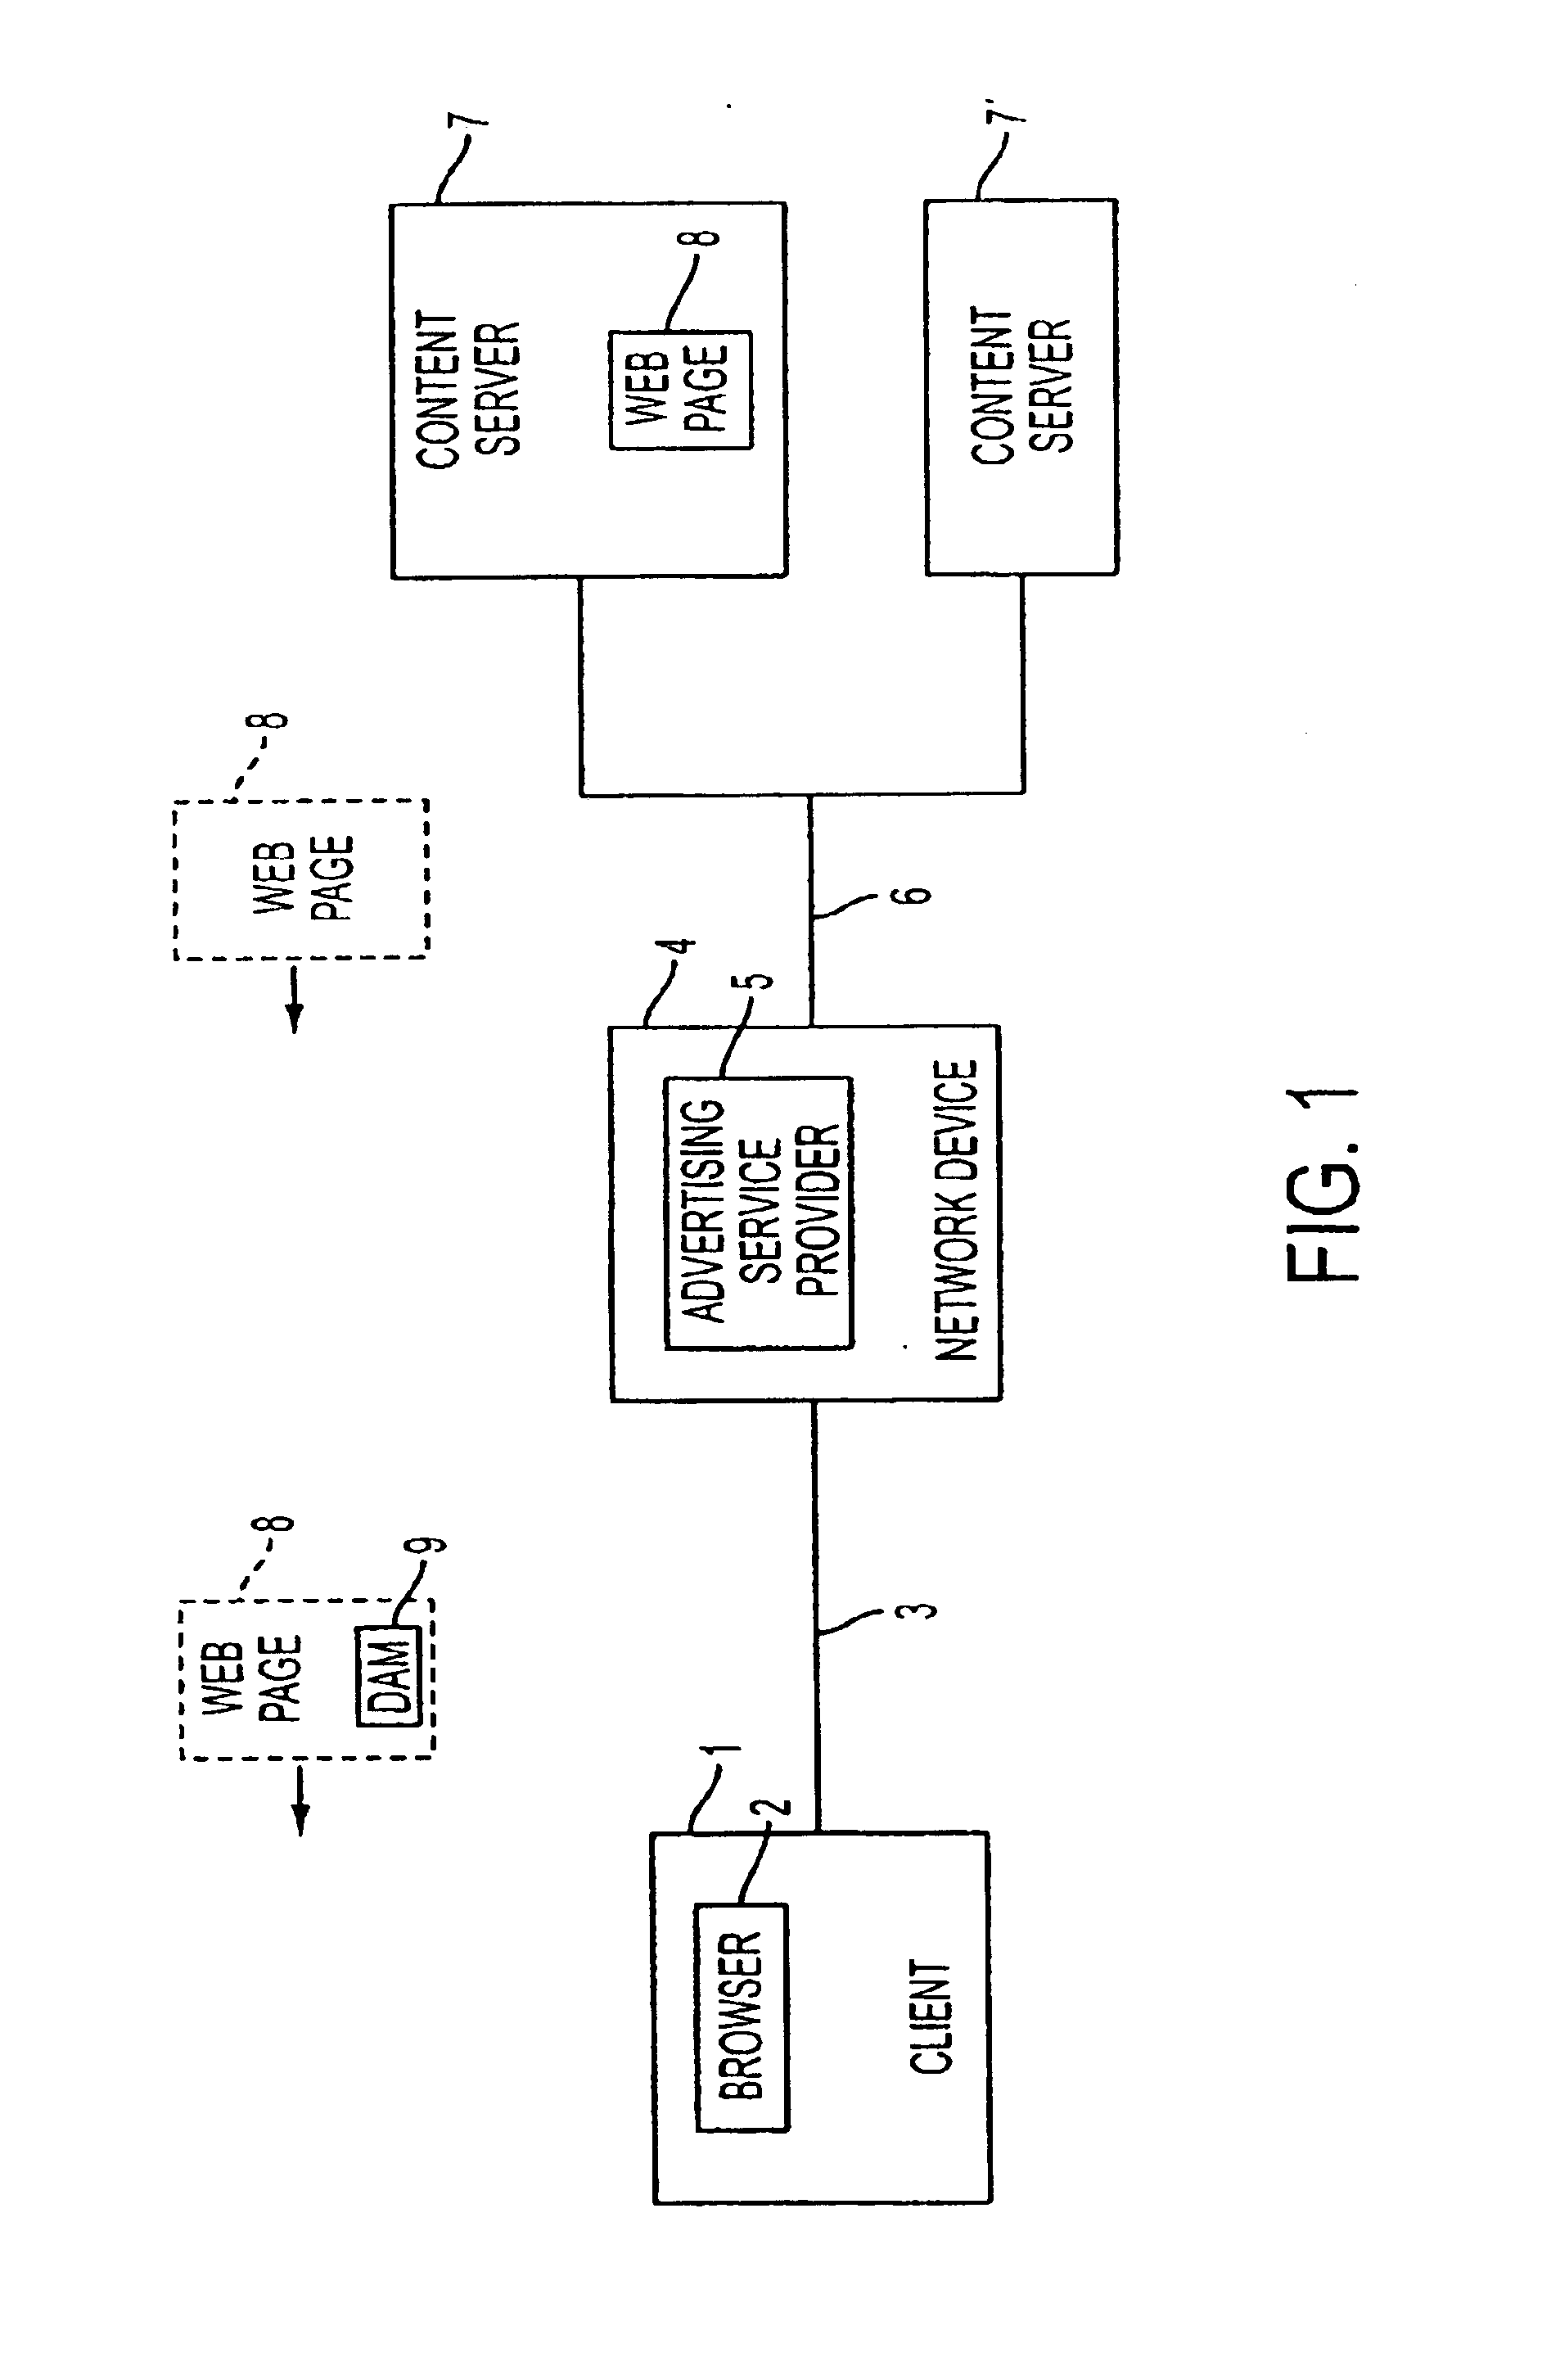 System for delivery of dynamic content to a client device